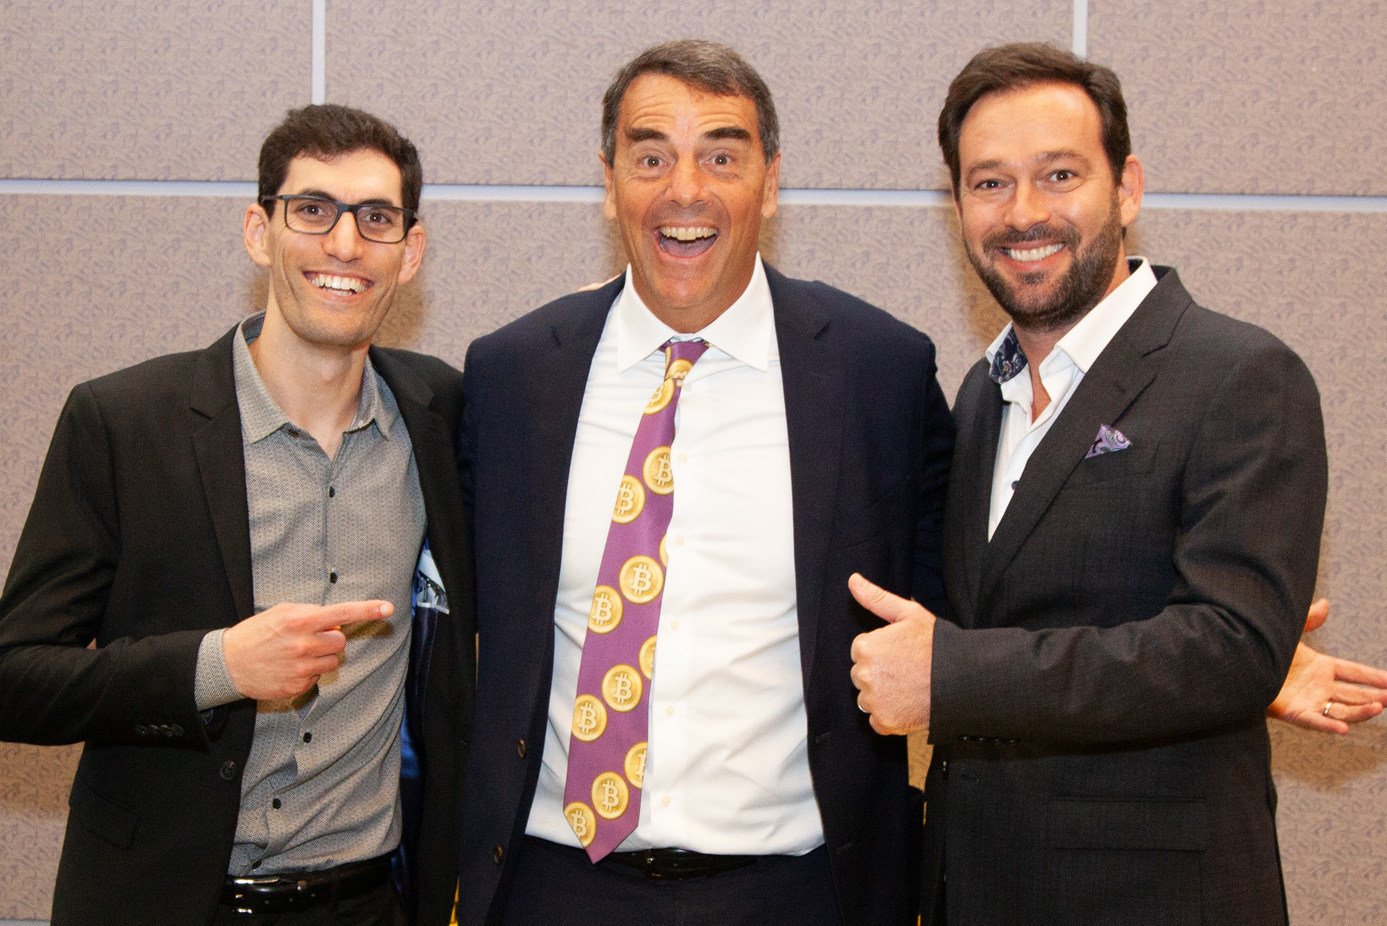 Tim Draper's Venture Studio to Triple-Down on Blockchain Projects With a $25M Fund